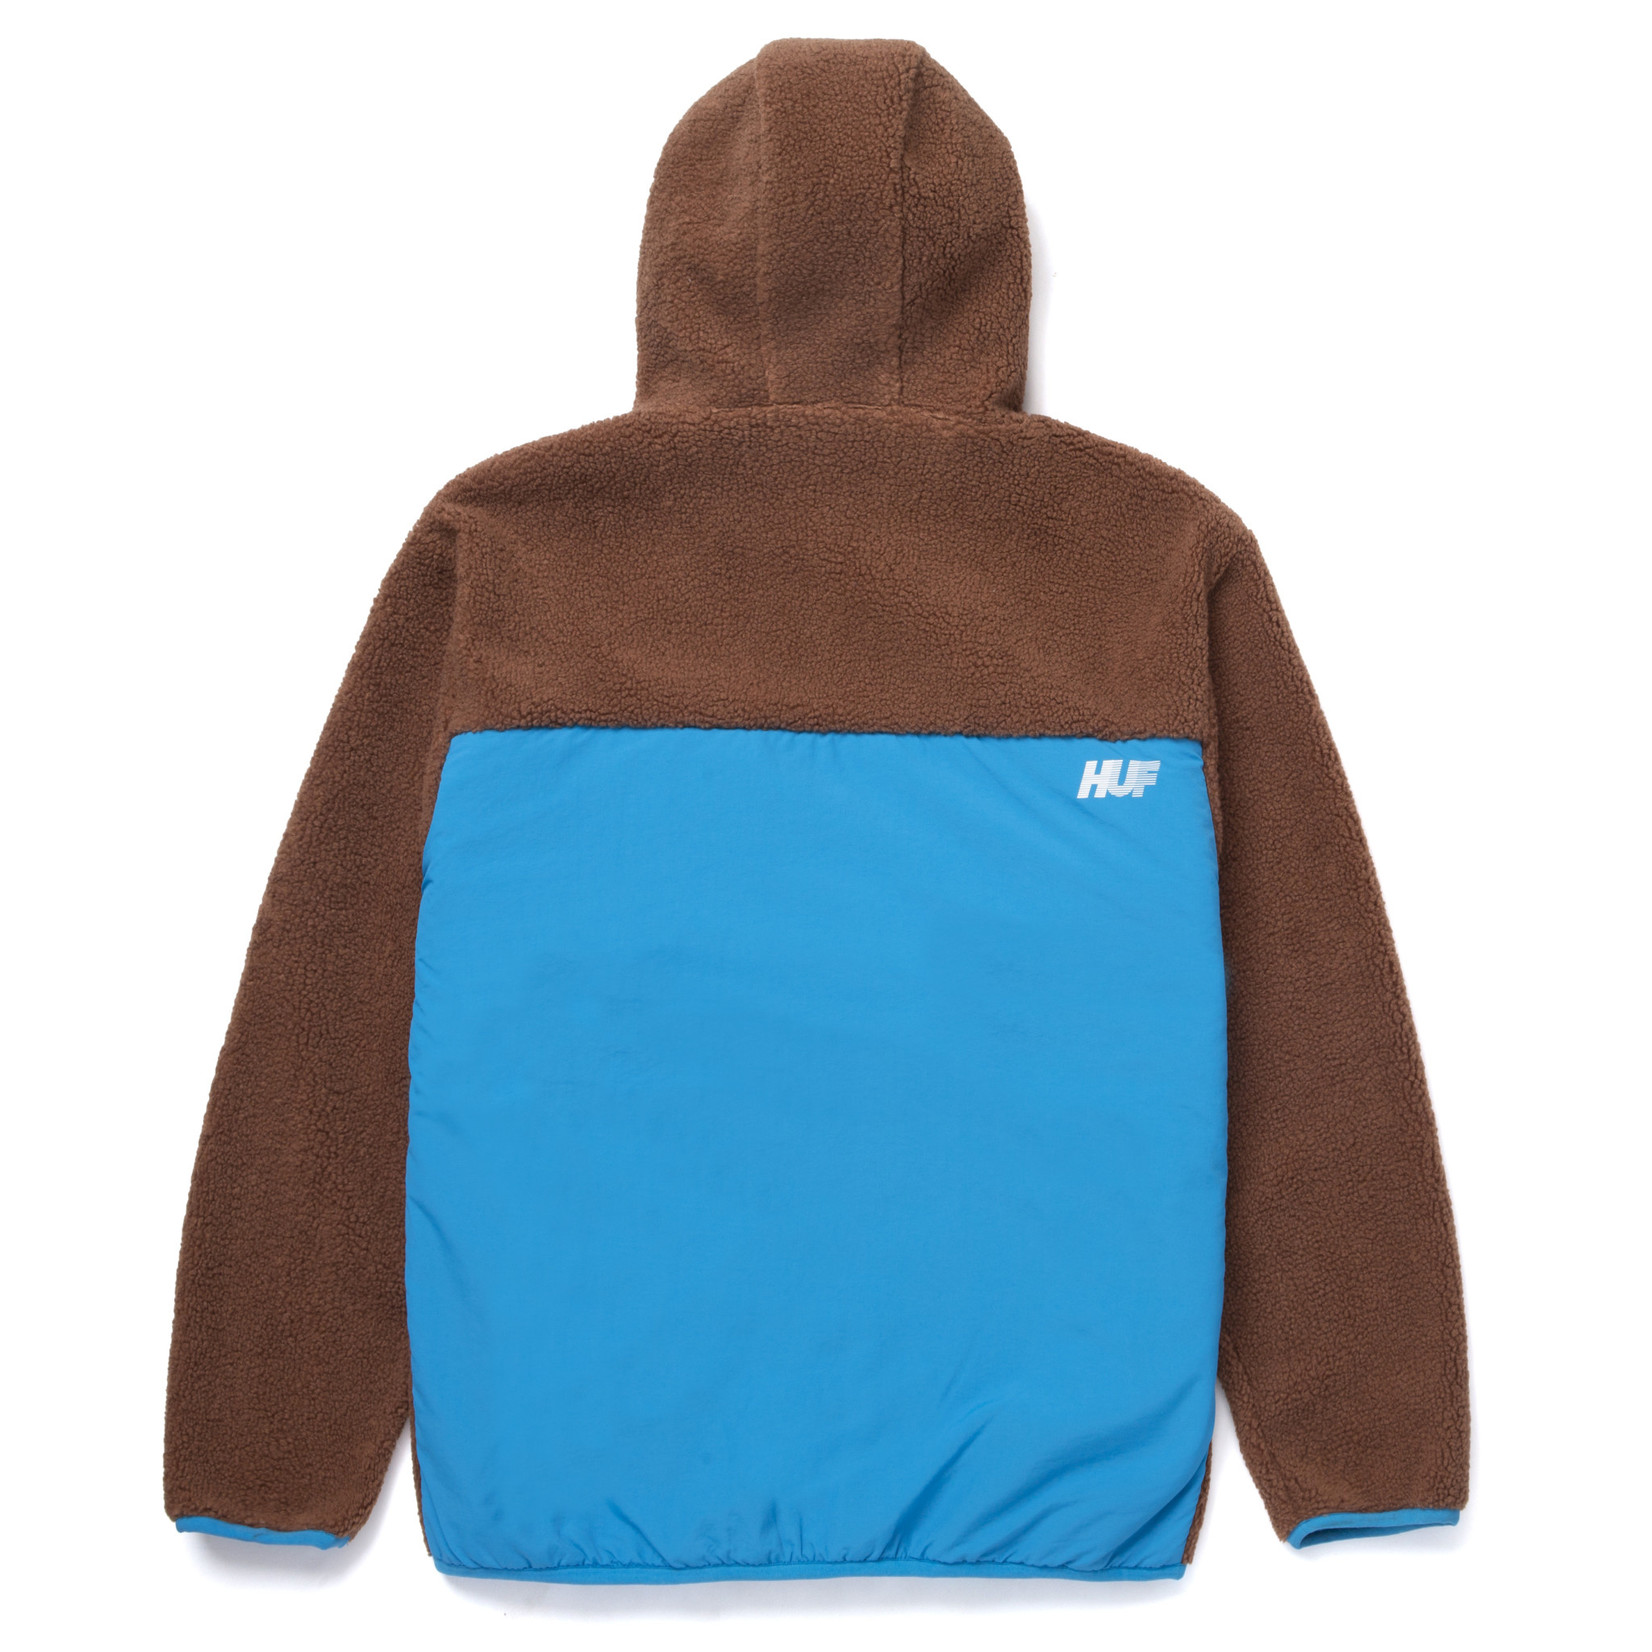 HUF FORT POINT SHERPA JACKET - DUST BROWN